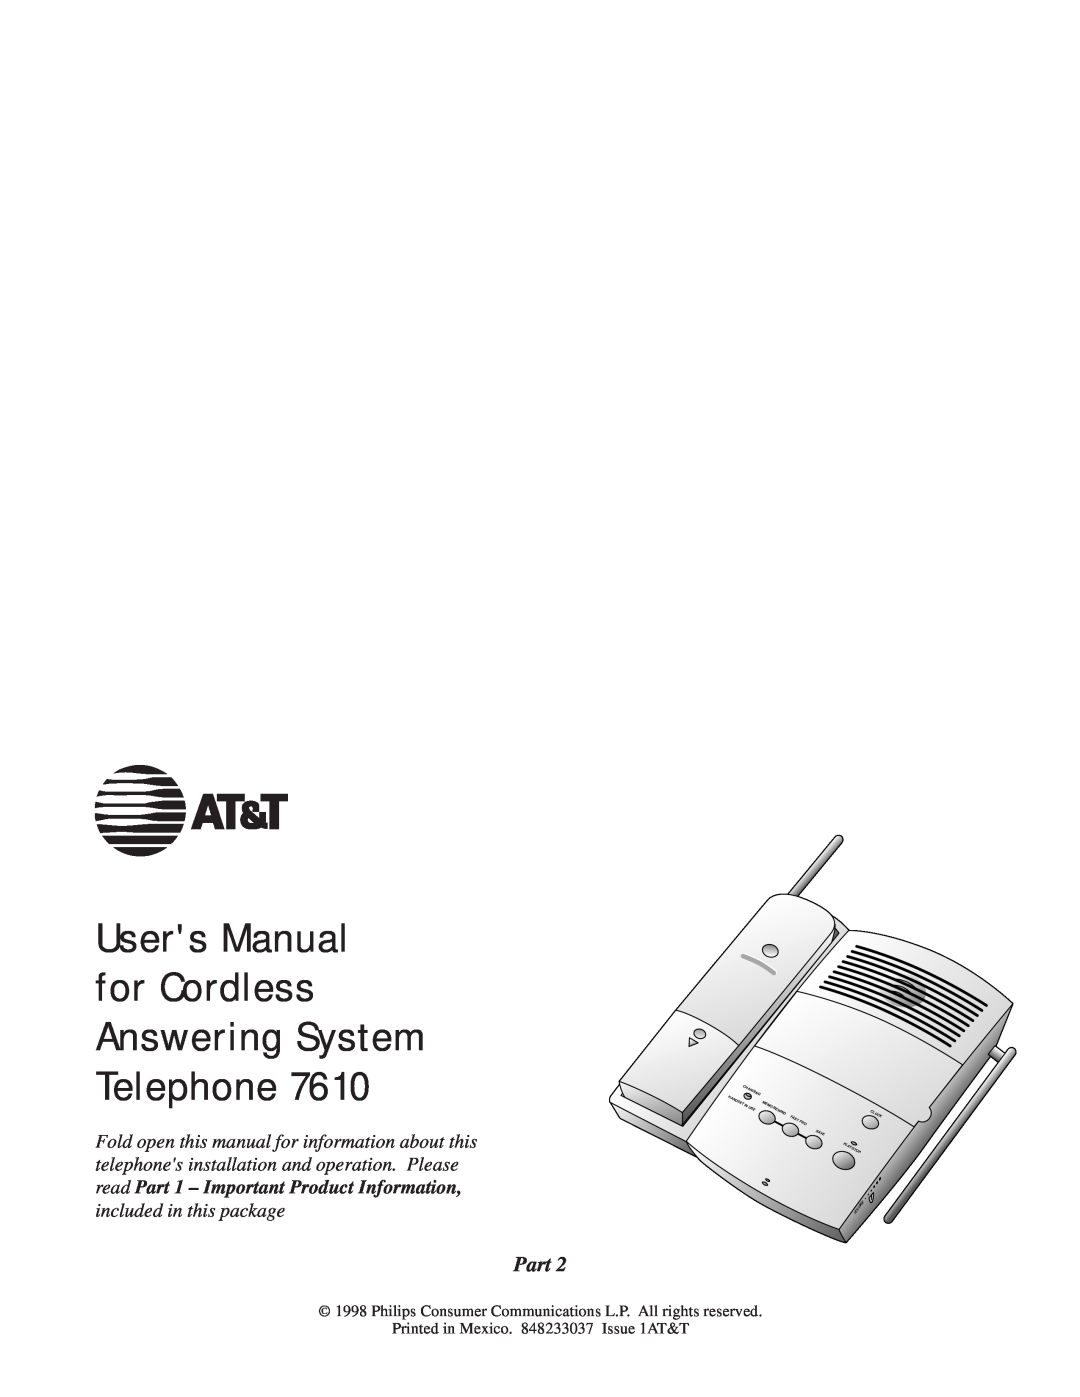 AT&T 7610 user manual Part, Users Manual for Cordless Answering System Telephone, included in this package, Save, Volume 